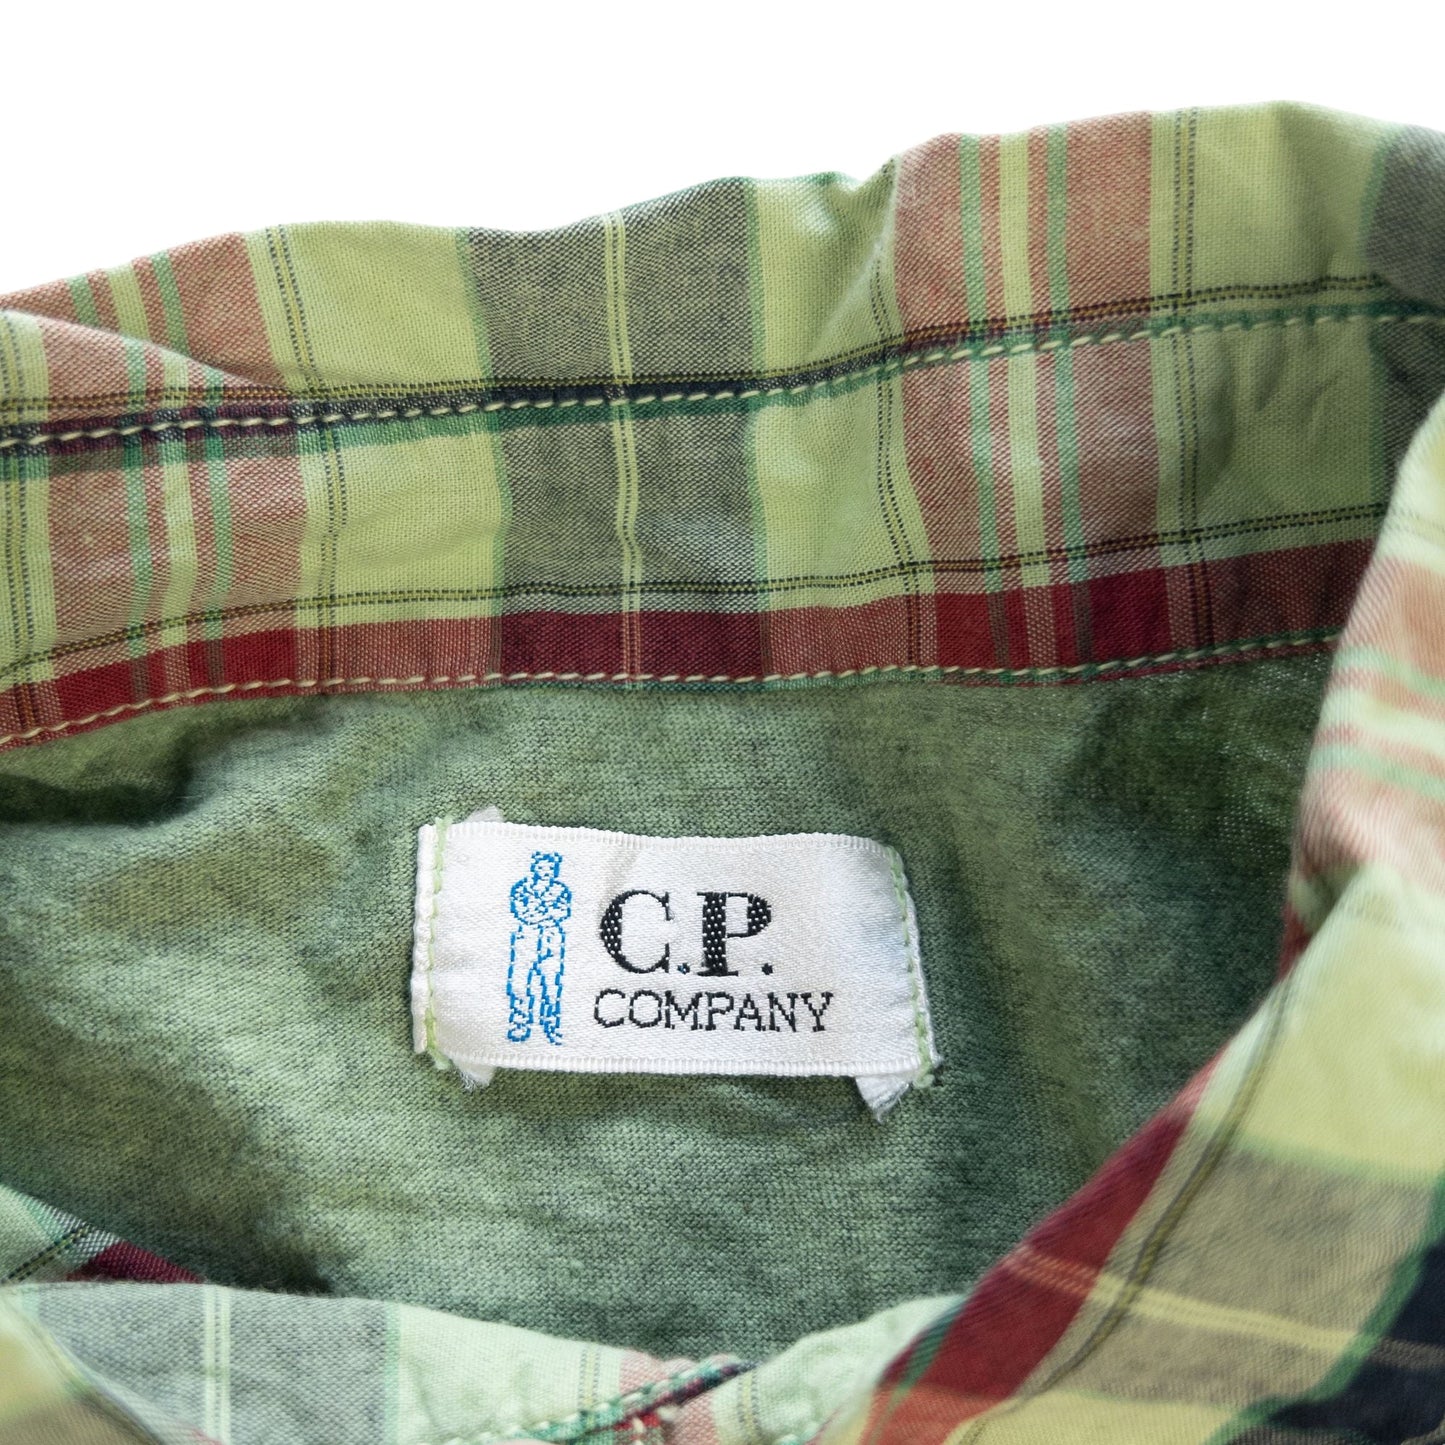 Vintage CP Company Check Button Up Short Sleeve Shirt Size XS